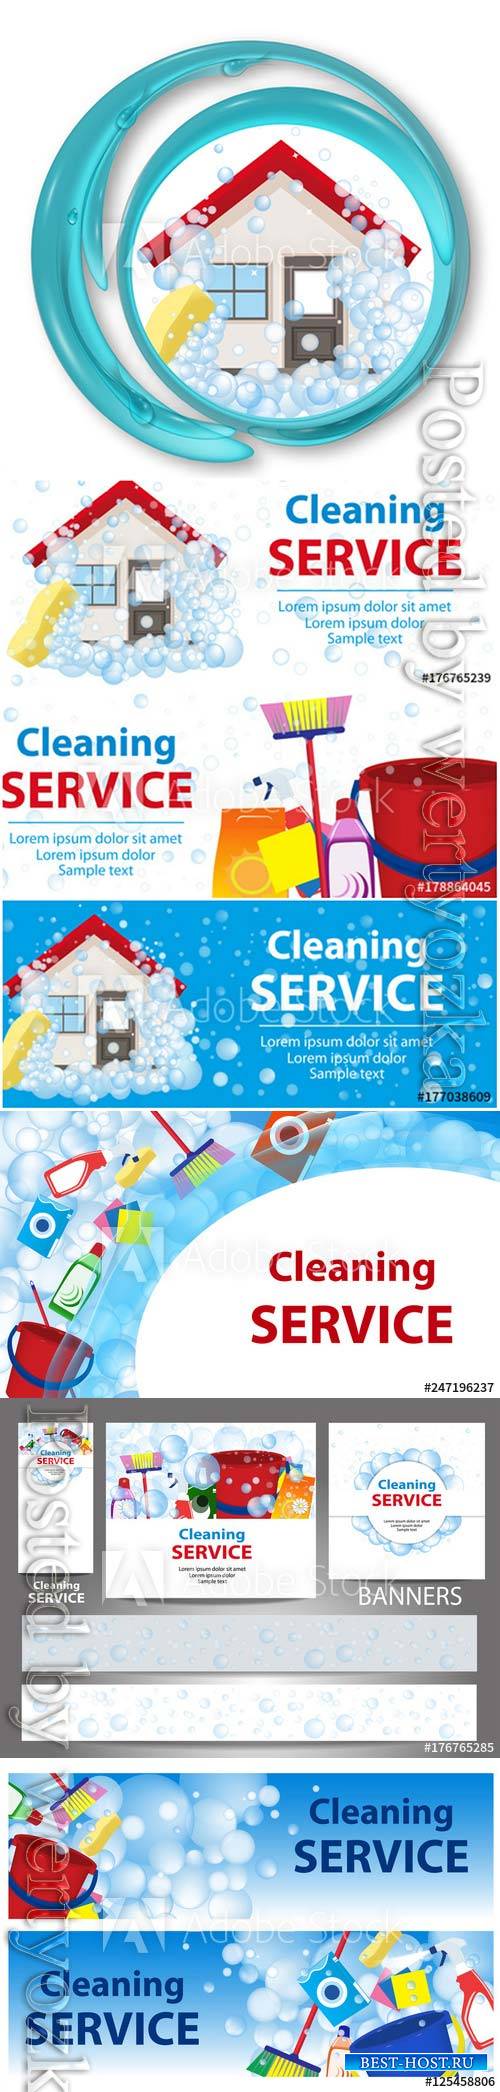 Poster template for house cleaning services vector design